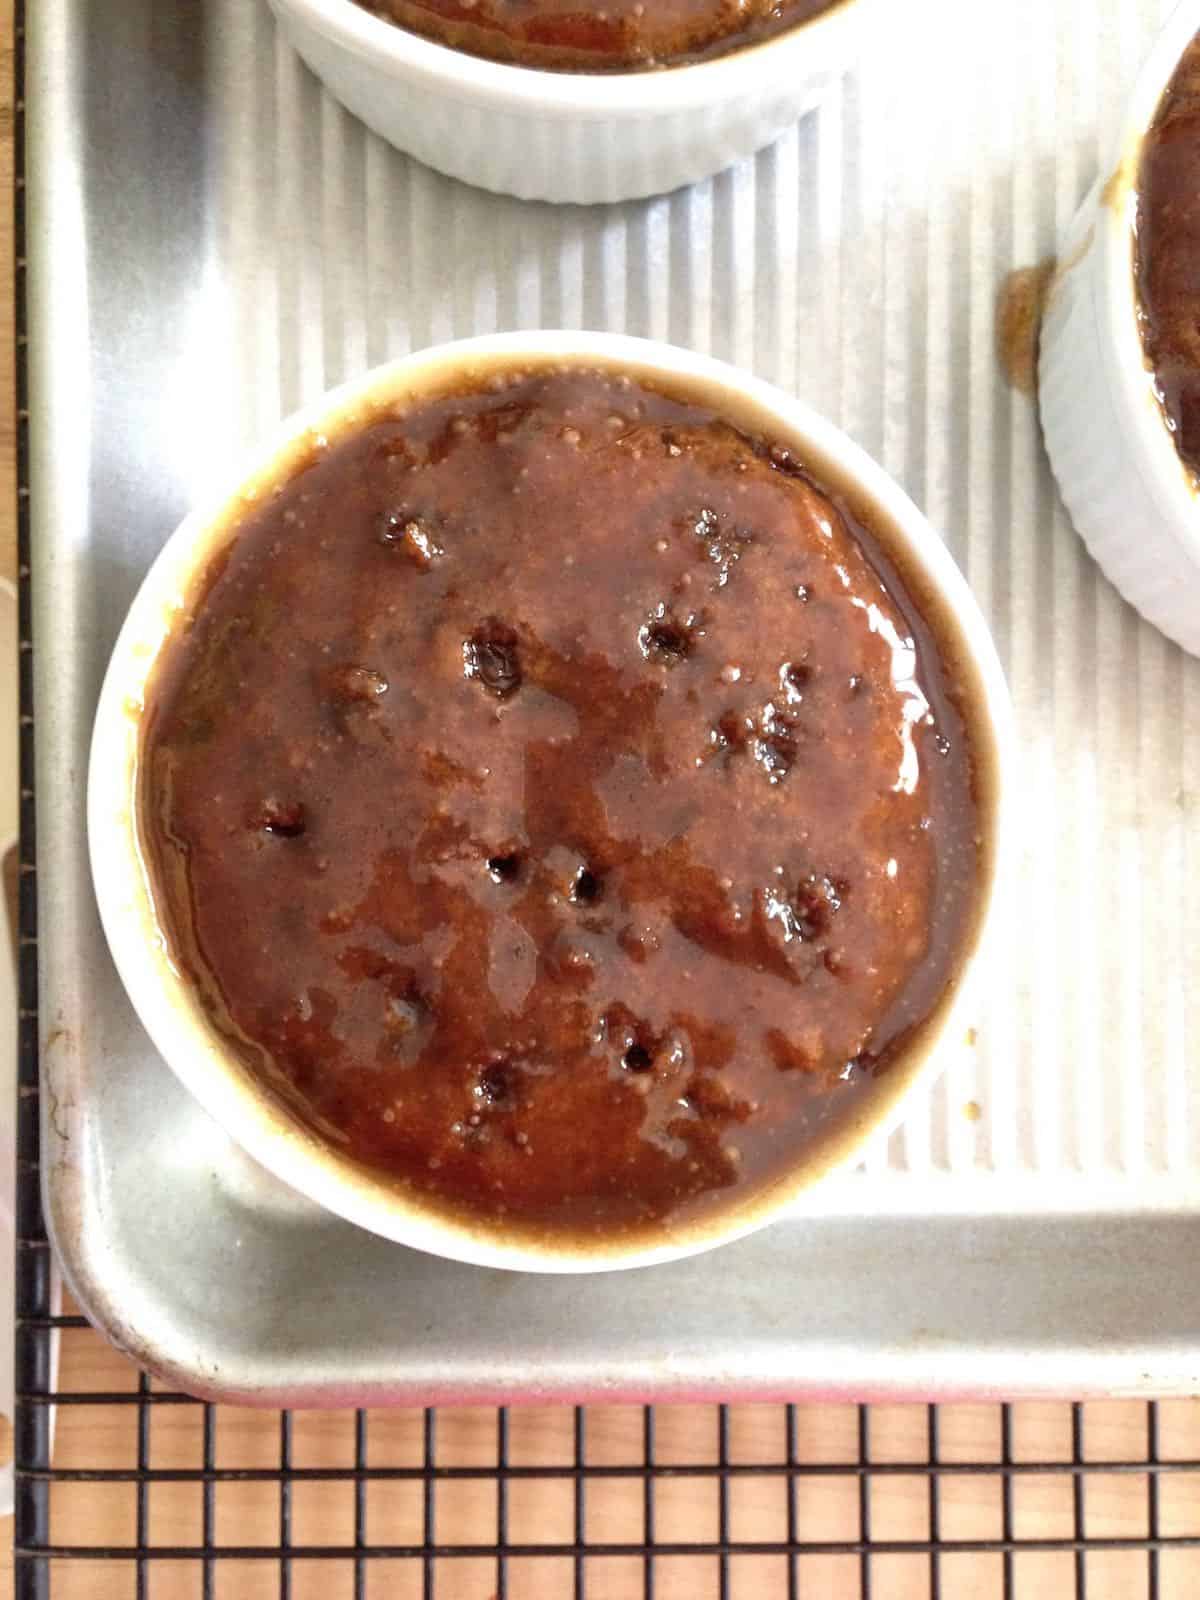 poke the holes through to the bottom of the Spirited Sticky Toffee Pudding cake